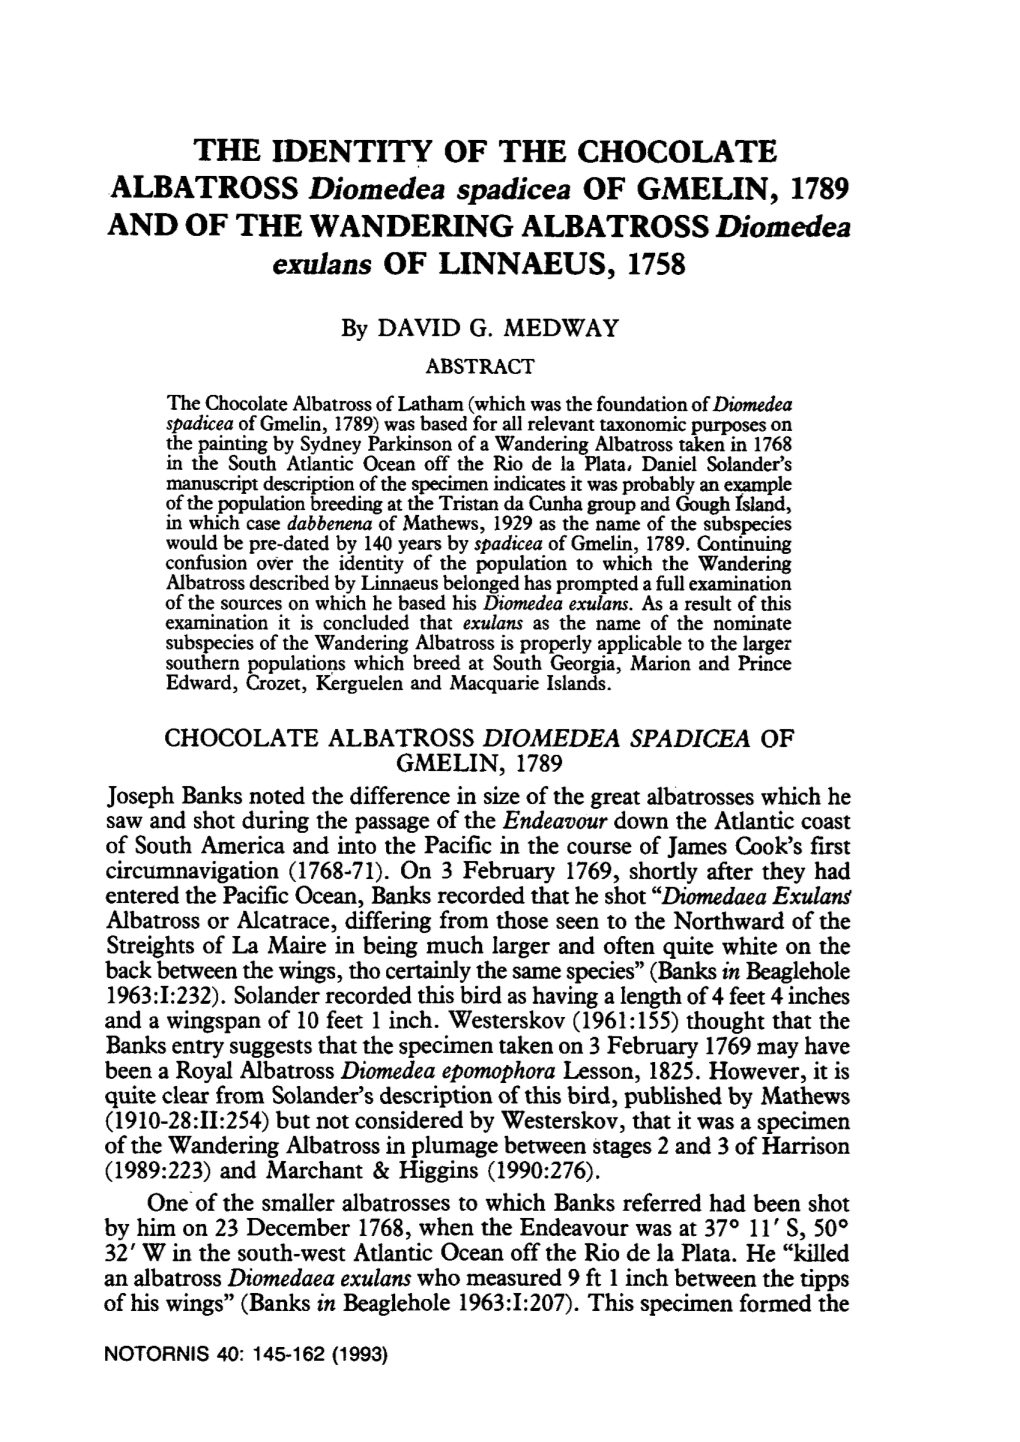 THE IDENTITY of the CHOCOLATE ALBATROSS Diomedea Spadicea of GMELIN, 1789 and of the WANDERING ALBATROSS Diomedea Exulans of LINNAEUS, 1758